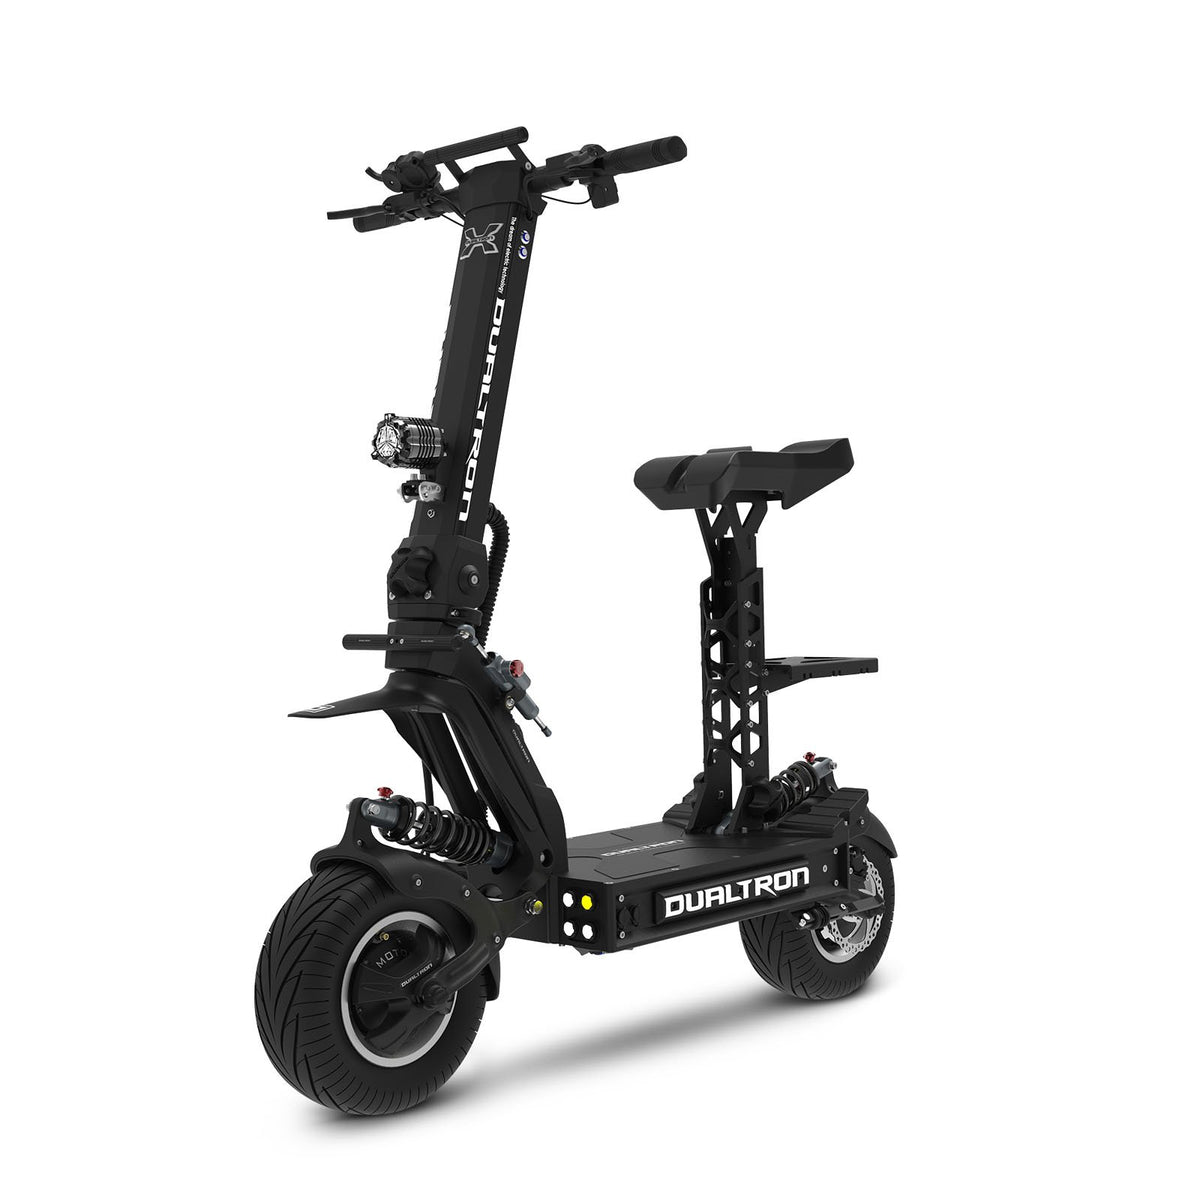 DUALTRON X2 Electric Scooter-Electric Scooters London